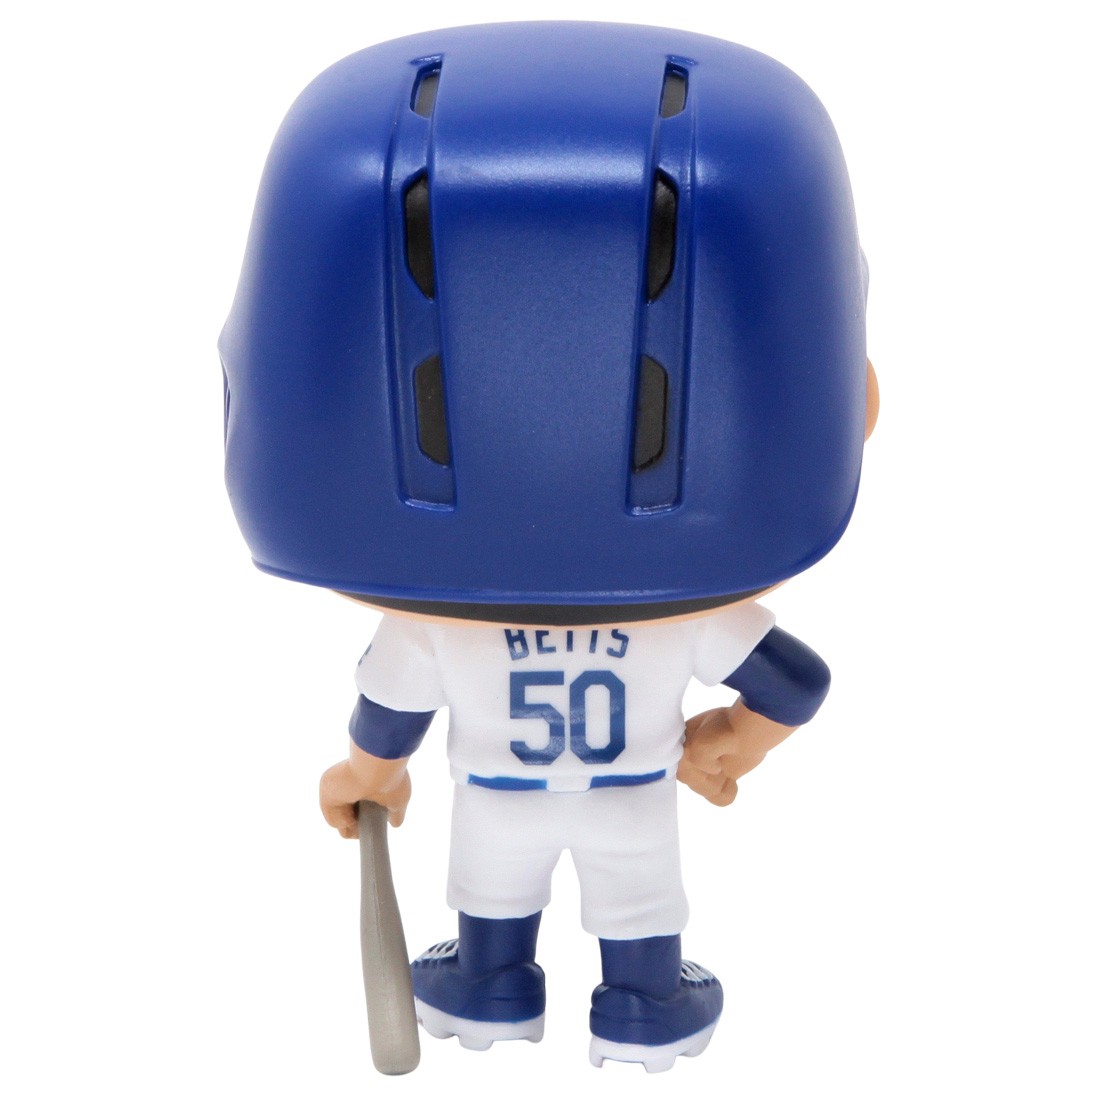  POP Funko Pop! MLB: Dodgers - Mookie Betts (Home Uniform)  (Bundled with Compatible Plastic Pop Box Protector Case), 3.75 inches :  Toys & Games